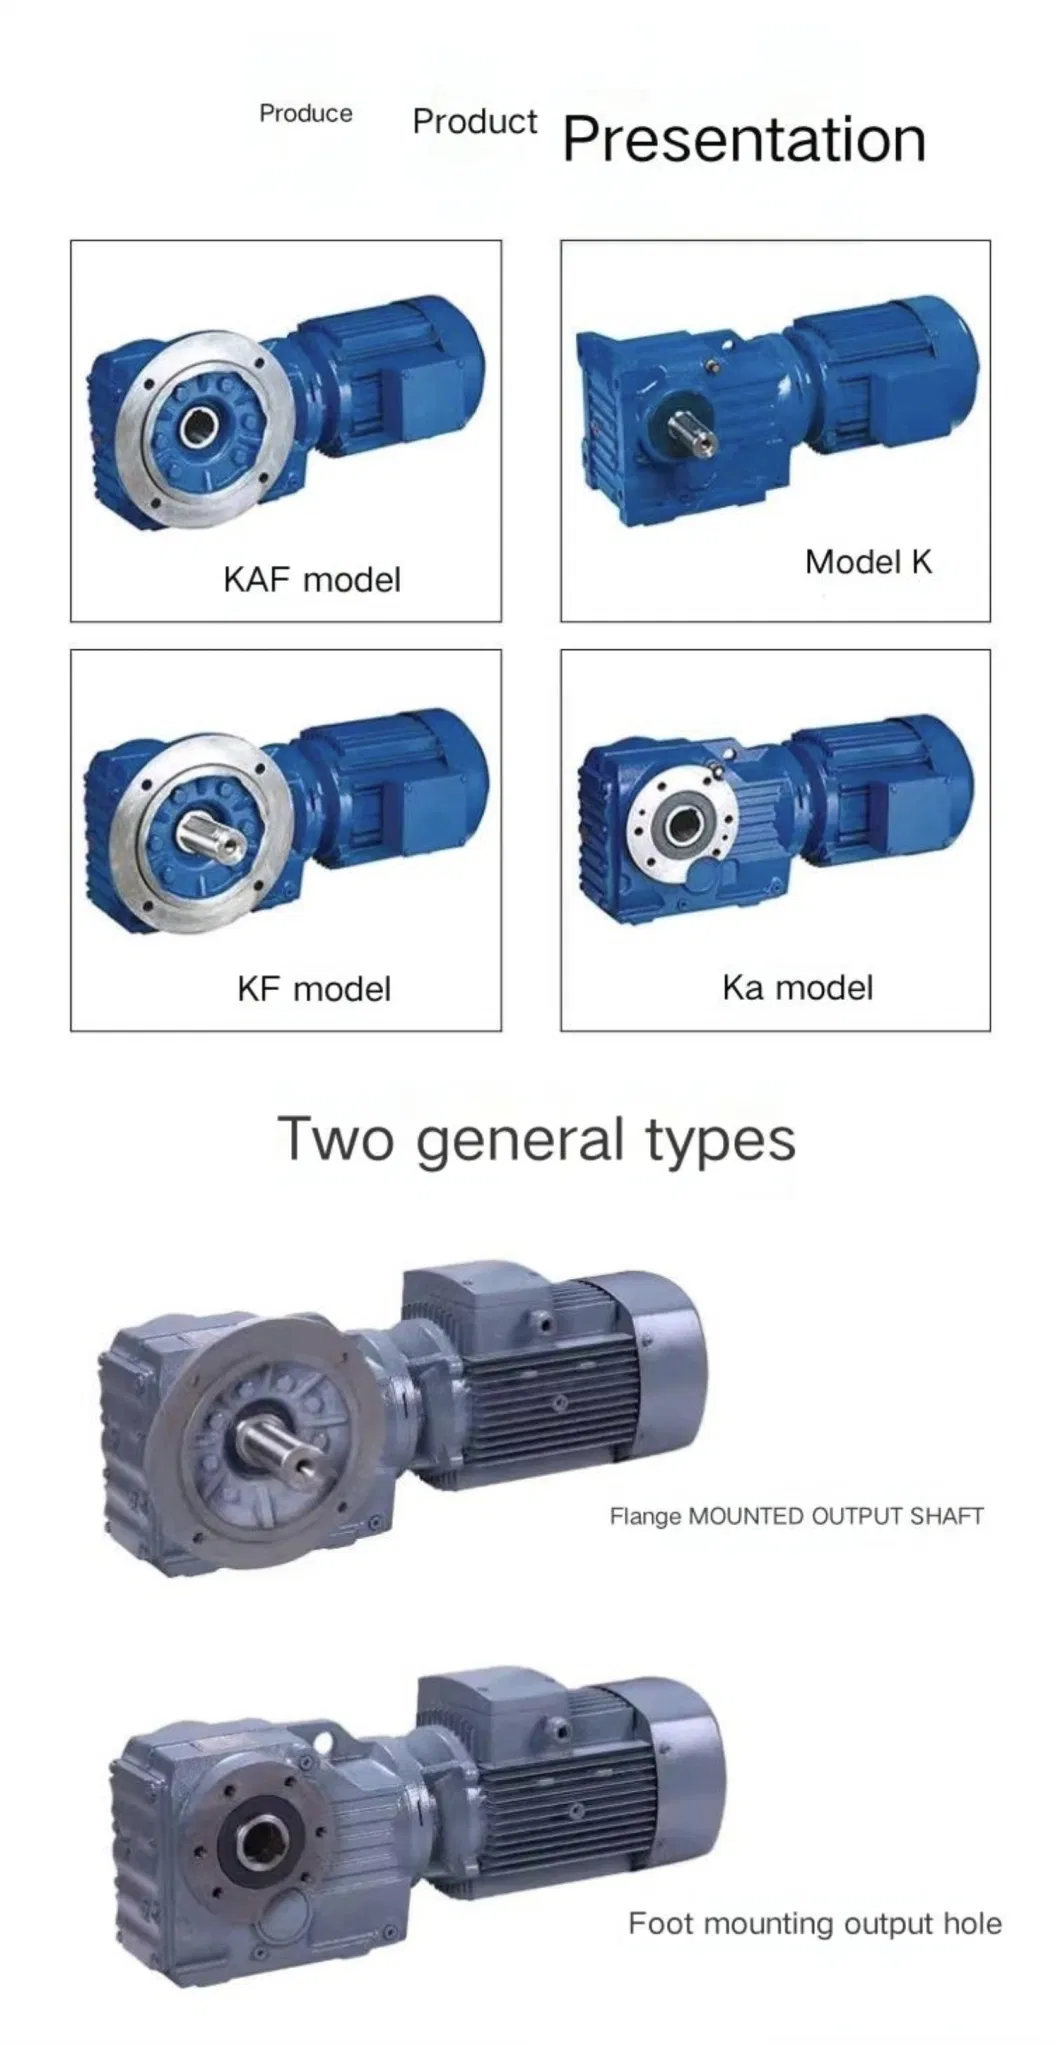 K Series Spiral Bevel Gear Reducers, Four Major Series Mechanical Reducers, Right Angle Horizontal Industrial Reducers